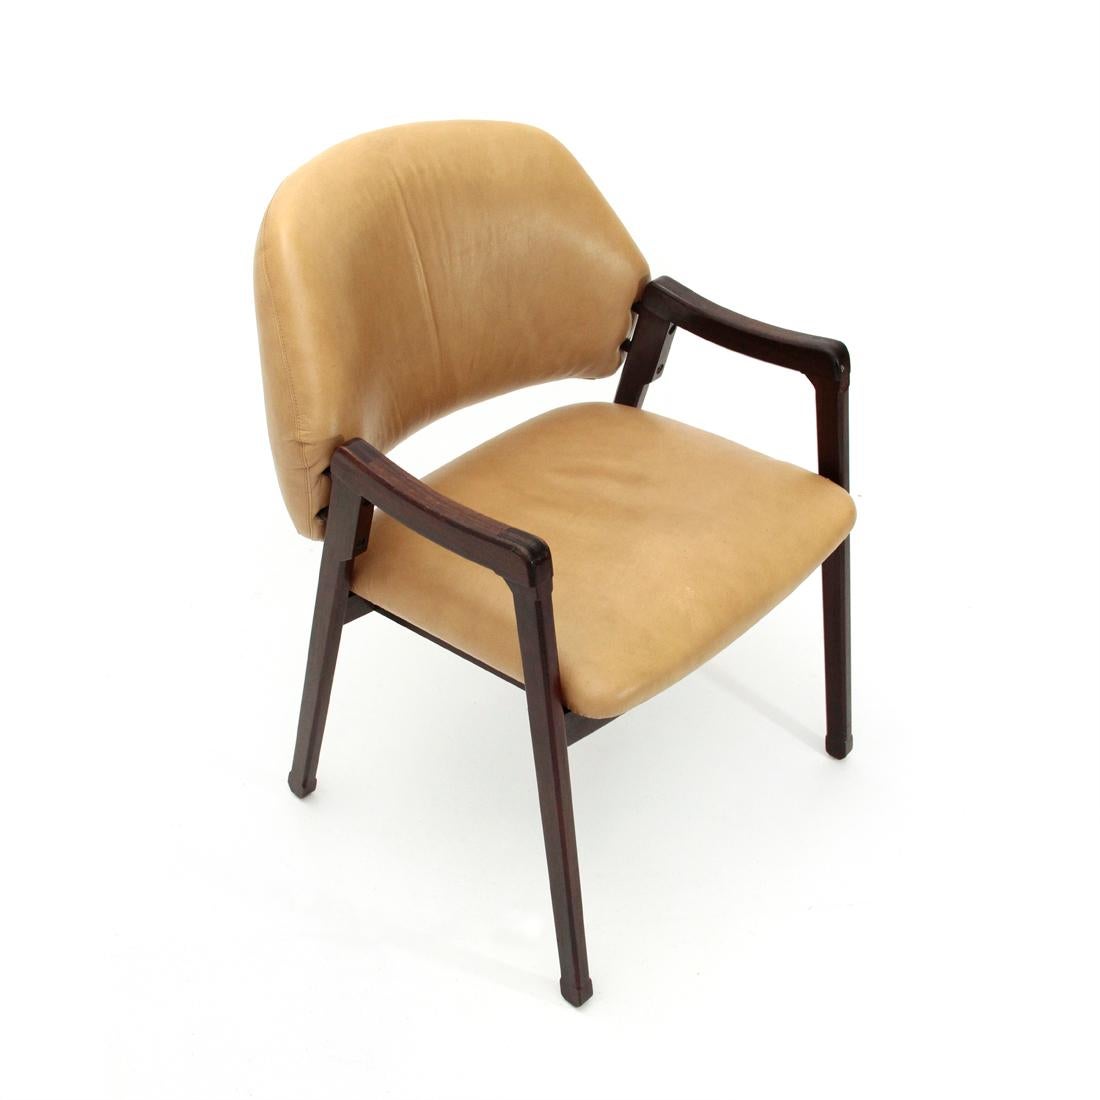 Armchair produced by Cassina in the 1960s designed by Ico Parisi.
Wooden frame, seat and backrest padded and lined in leather, metal spacers.
Good general conditions, some signs due to normal use over time.

Dimensions: Length 58 cm, depth 55